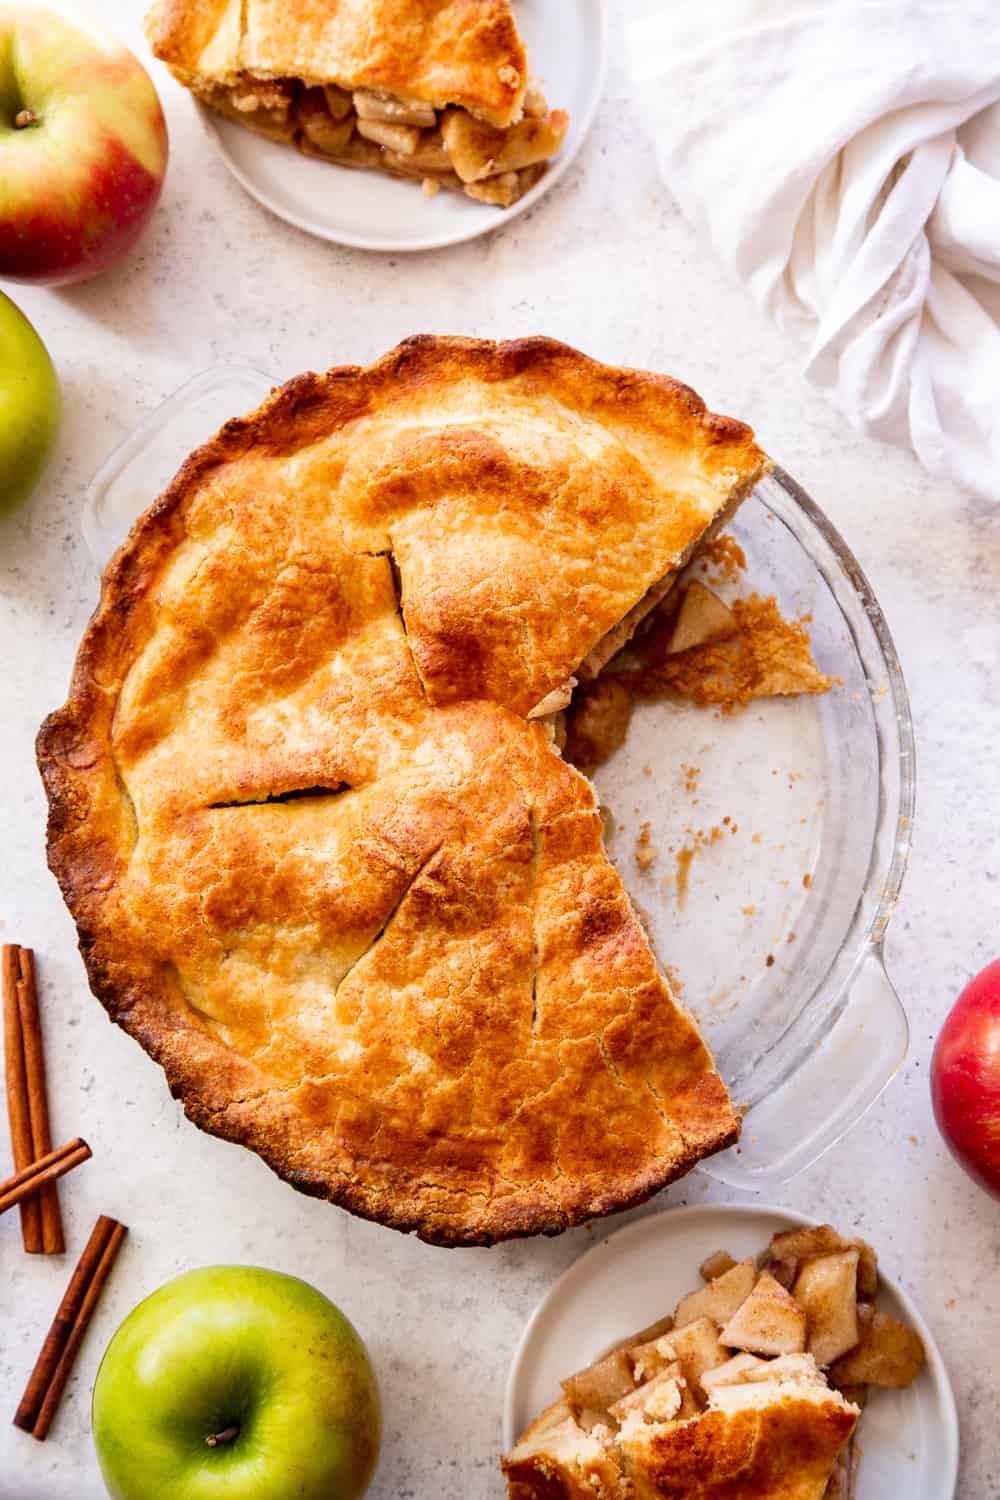 This classic Paleo Apple Pie has an easy double crust made with a dairy free option and is loaded with juicy gooey apples, warm spices and sweetened naturally with pure maple sugar.  It's a family favorite and perfect for Thanksgiving or any special celebration this fall!  #paleo #applepie #glutenfree #apples #cleaneating #paleobaking #glutenfreebaking